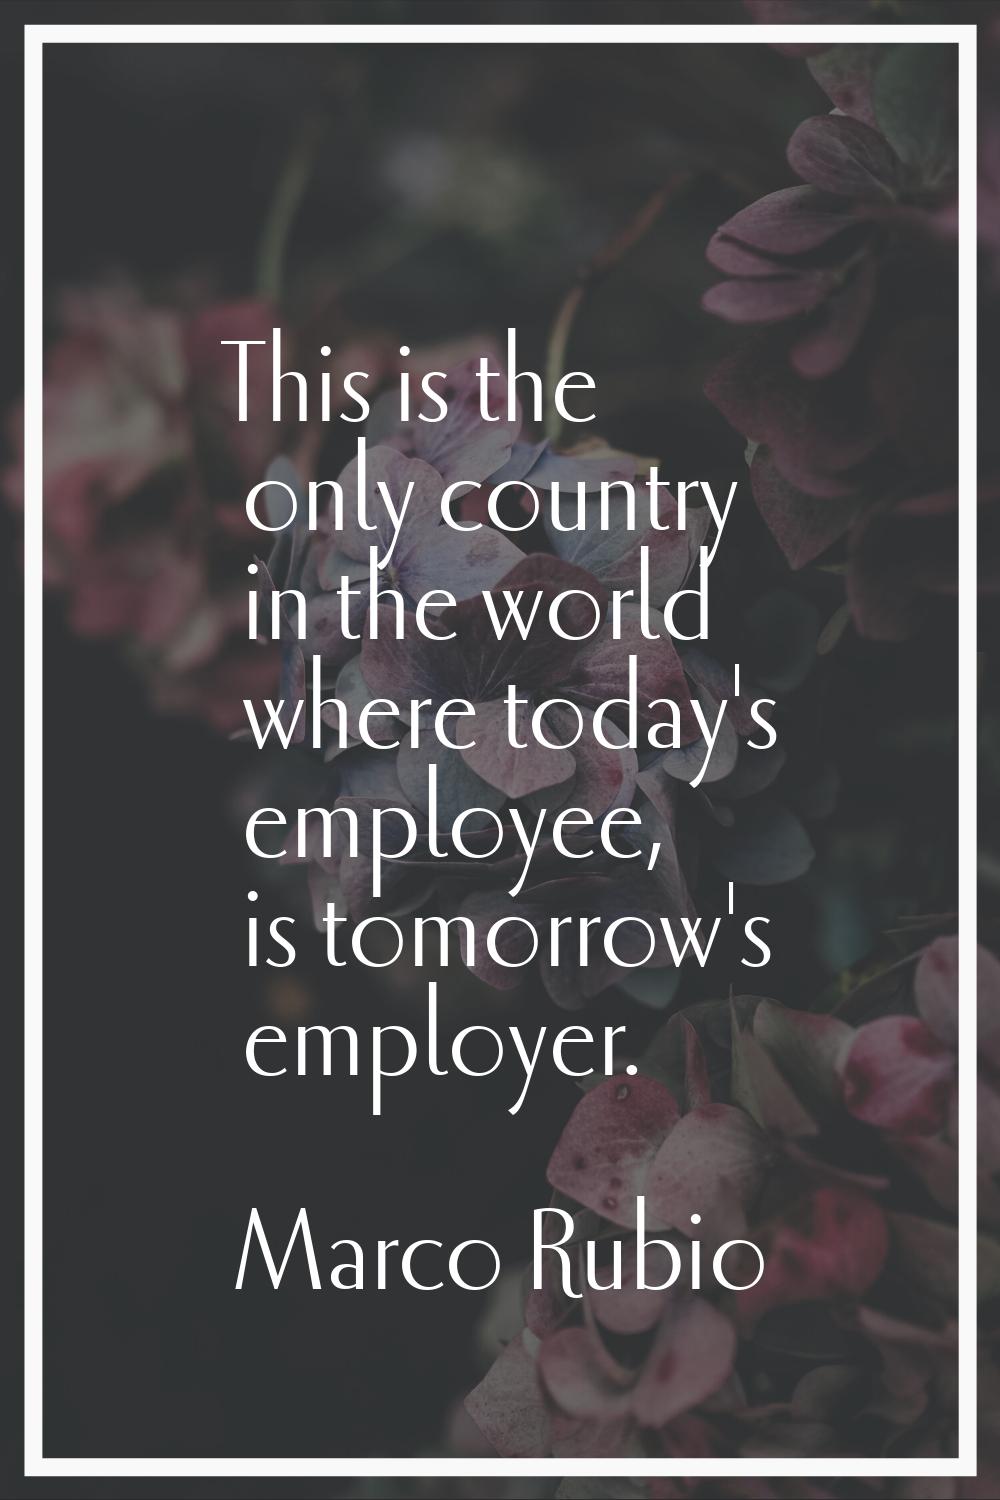 This is the only country in the world where today's employee, is tomorrow's employer.